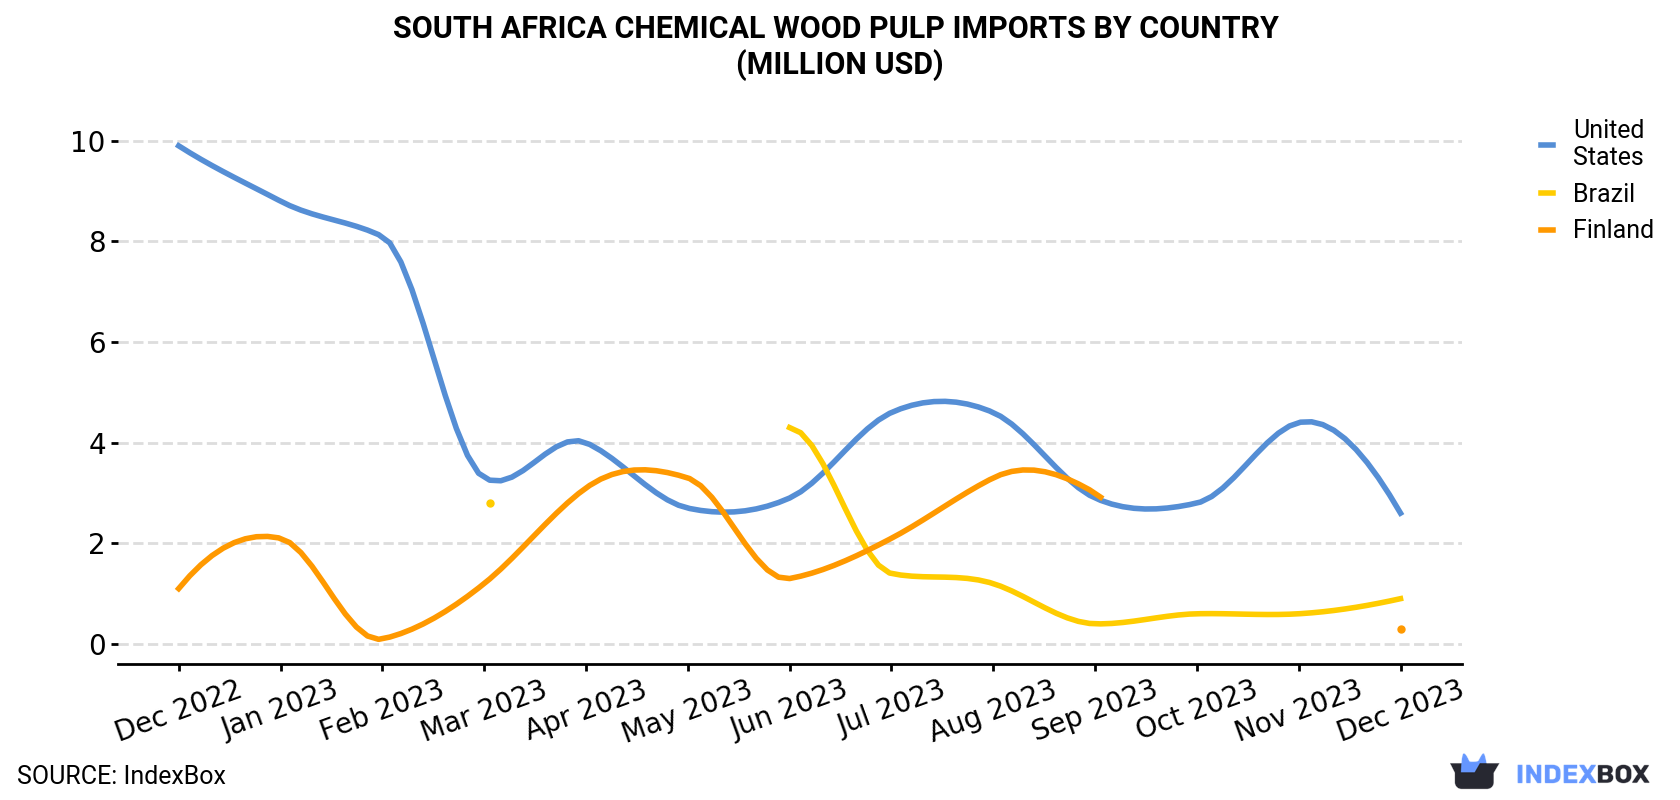 South Africa Chemical Wood Pulp Imports By Country (Million USD)